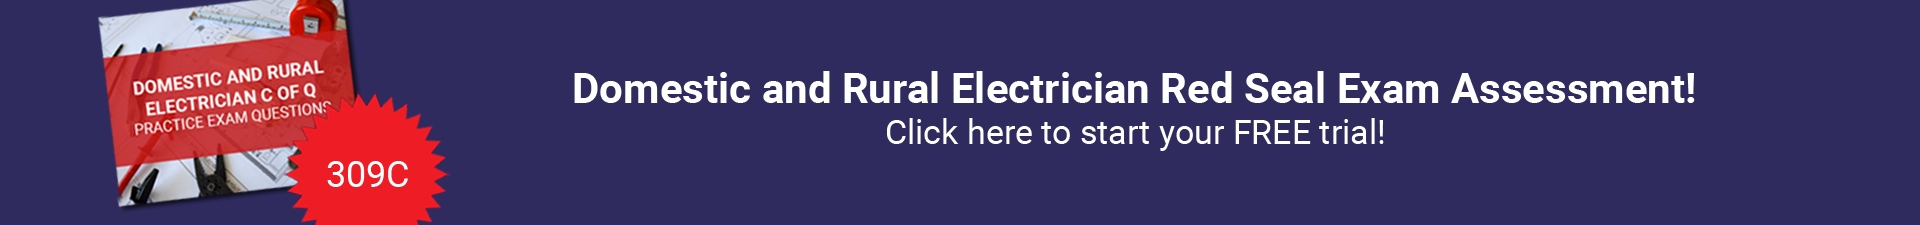 Domestic and Rural Electrician (309C) Free Assessment